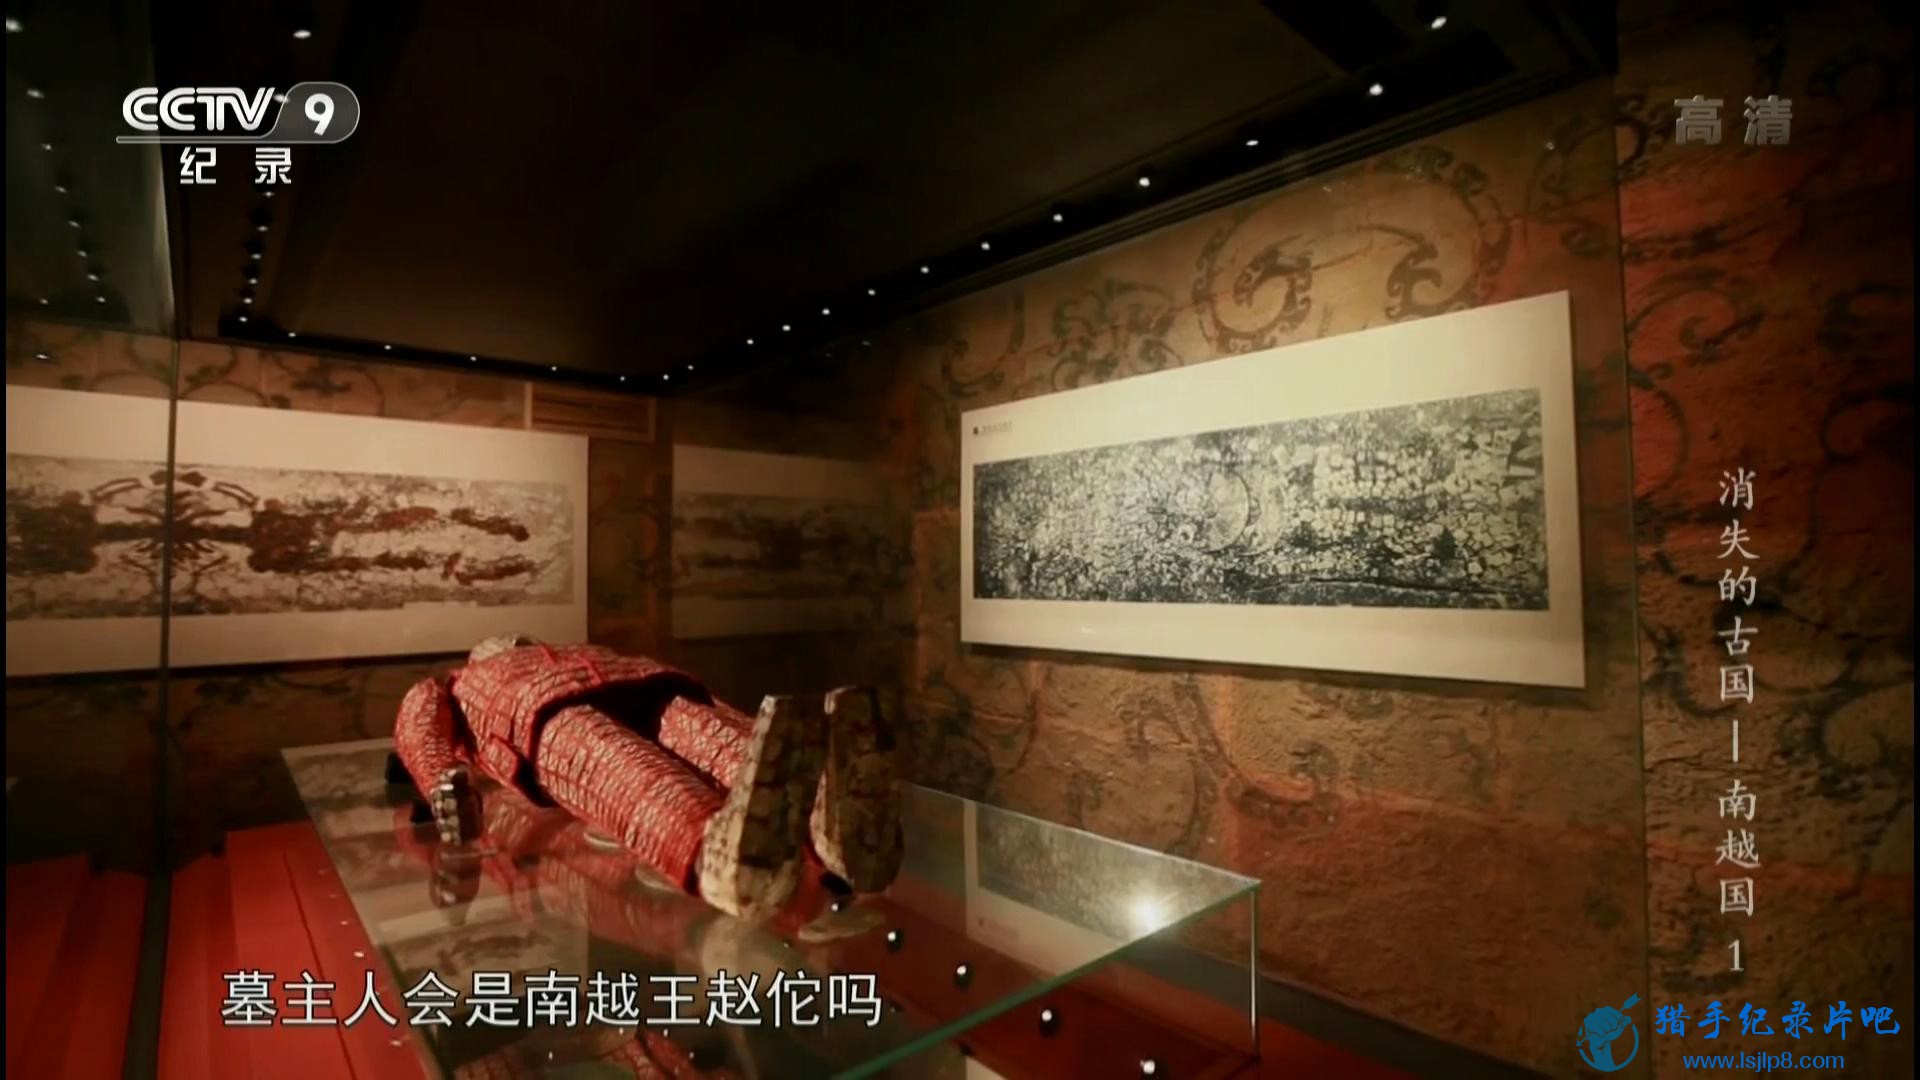 20150910_CCTV-9_Special.Edition-The.Disappeared.Ancient.States-Nanyue.Kingdom.EP.jpg